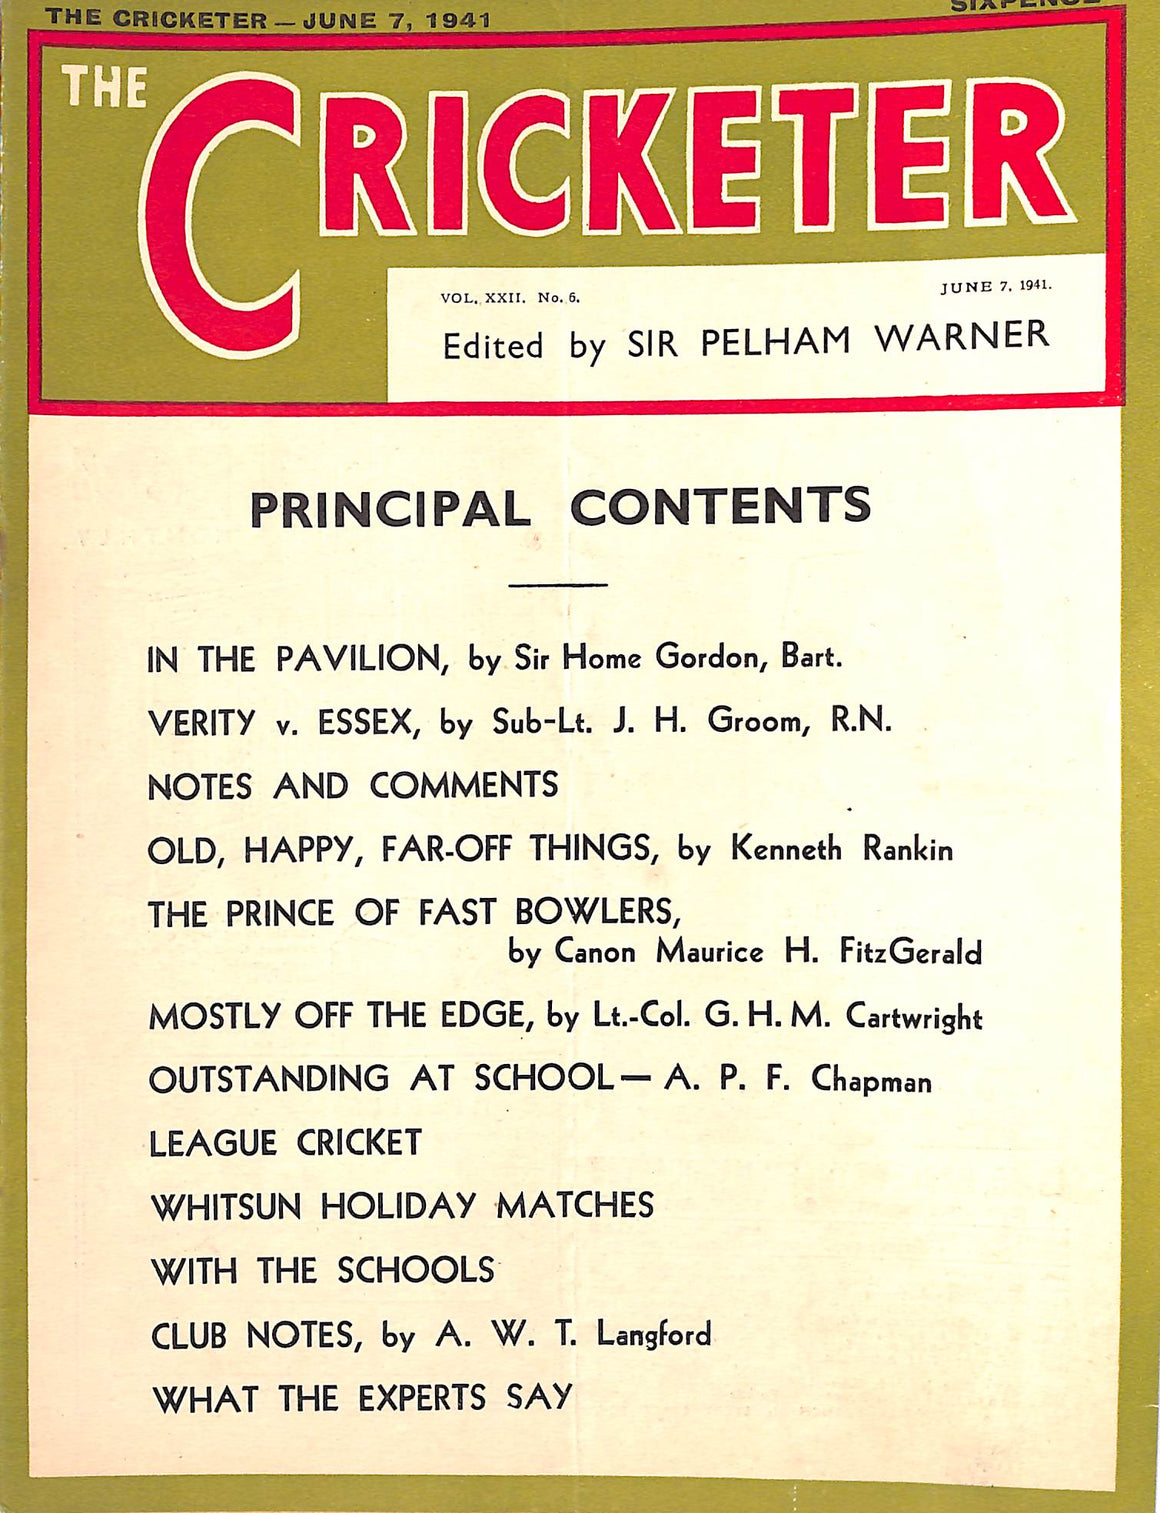 The Cricketer - June 7, 1941